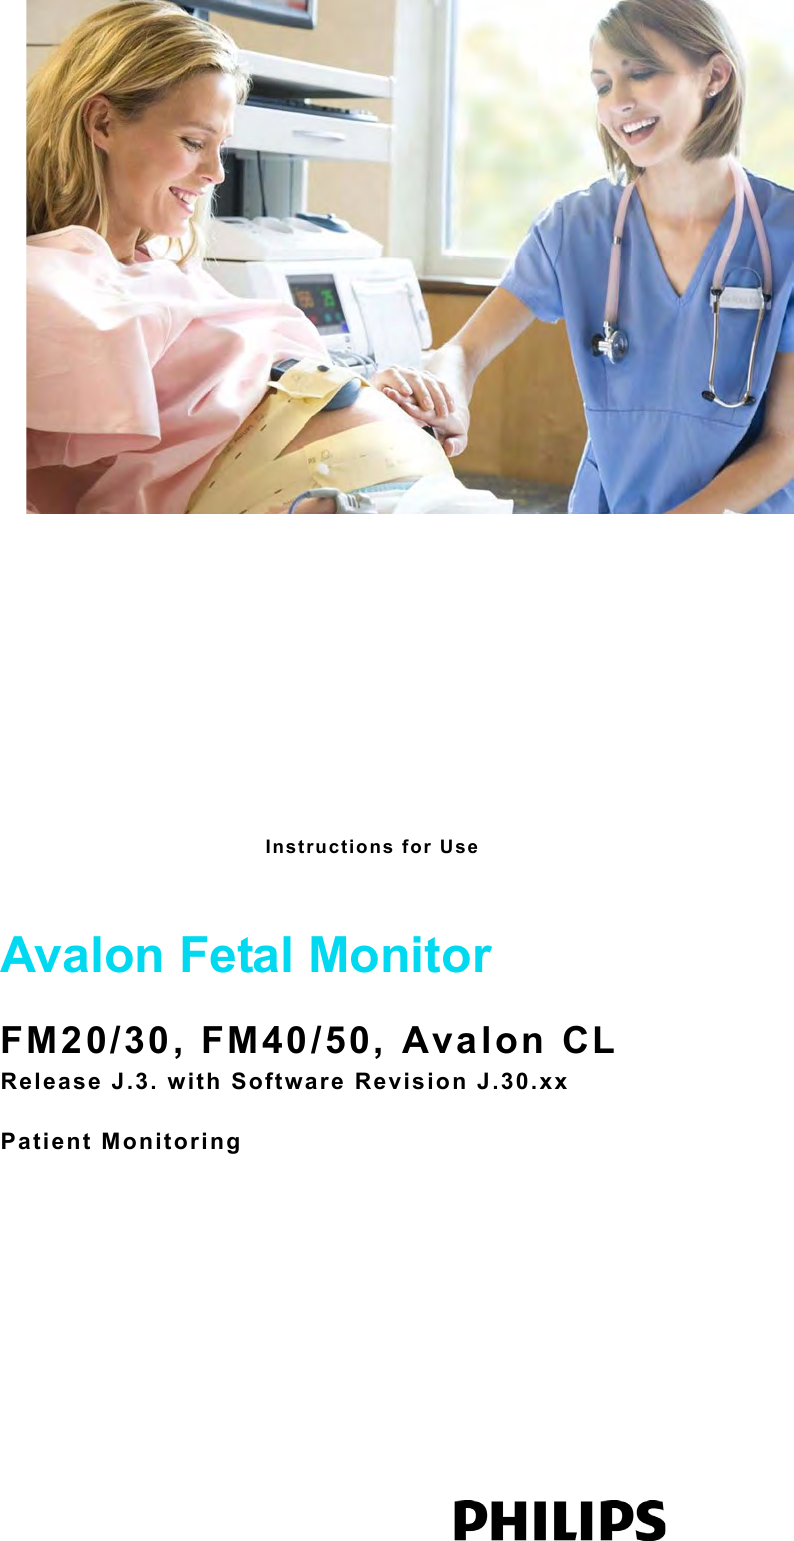 Instructions for Use Avalon Fetal MonitorFM20/30, FM40/50, Avalon CLRelease J.3. with Software Revision J.30.xxPatient Monitoring